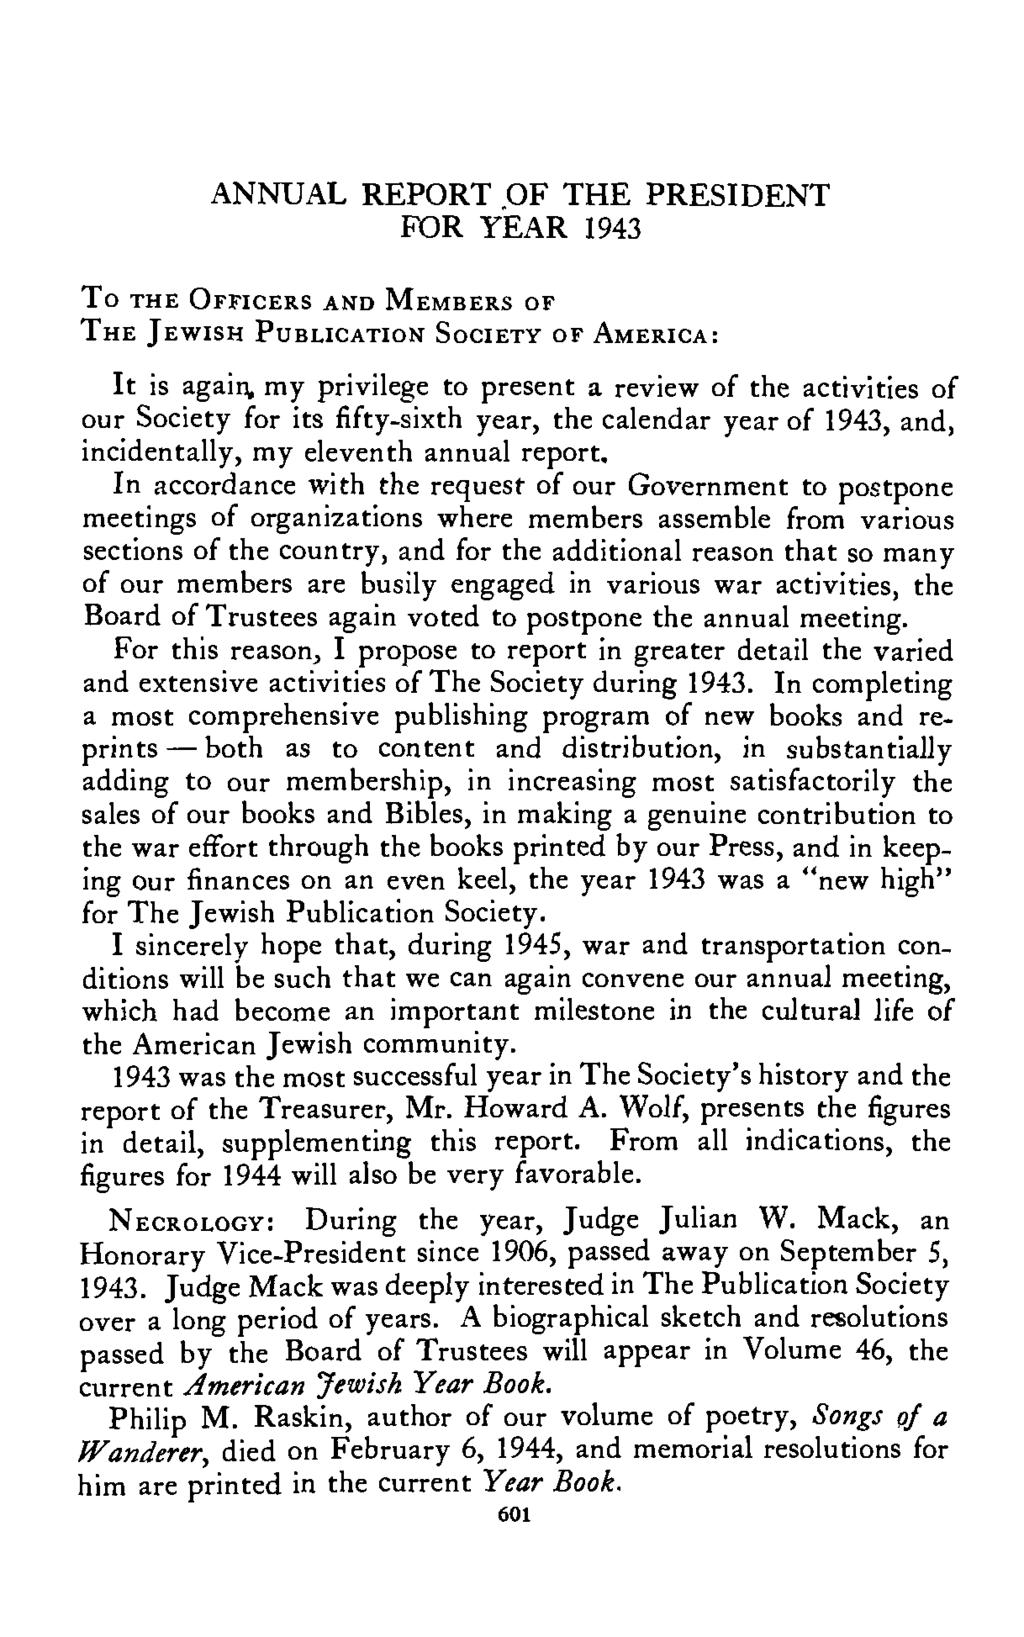 ANNUAL REPORT OF THE PRESIDENT FOR YEAR 1943 To THE OFFICERS AND MEMBERS OF THE JEWISH PUBLICATION SOCIETY OF AMERICA: It is again my privilege to present a review of the activities of our Society